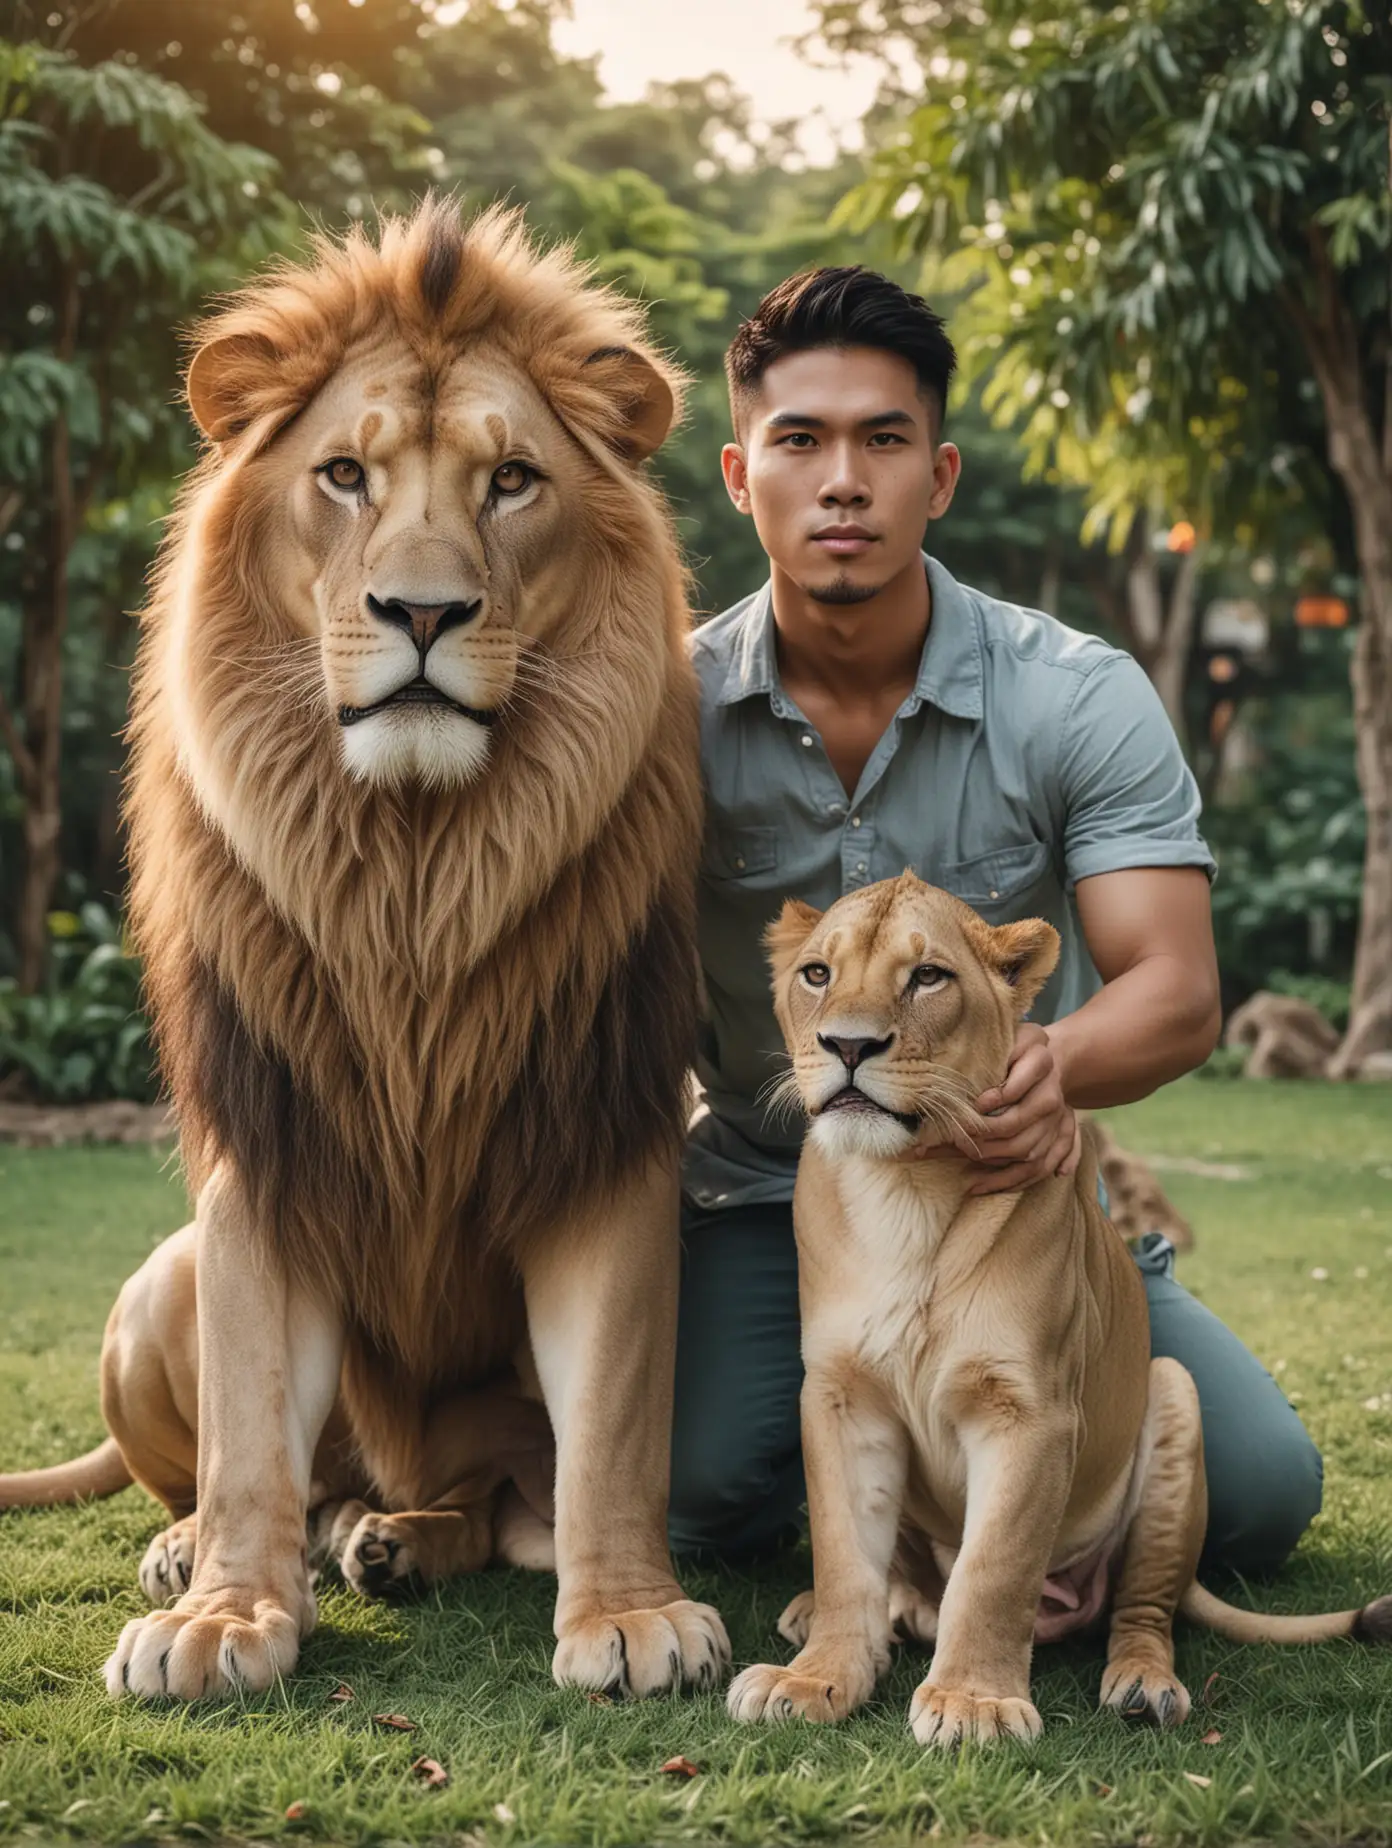 Handsome Thai Guy Posing with Pet Lion in Soft Light Cinematic Portrait